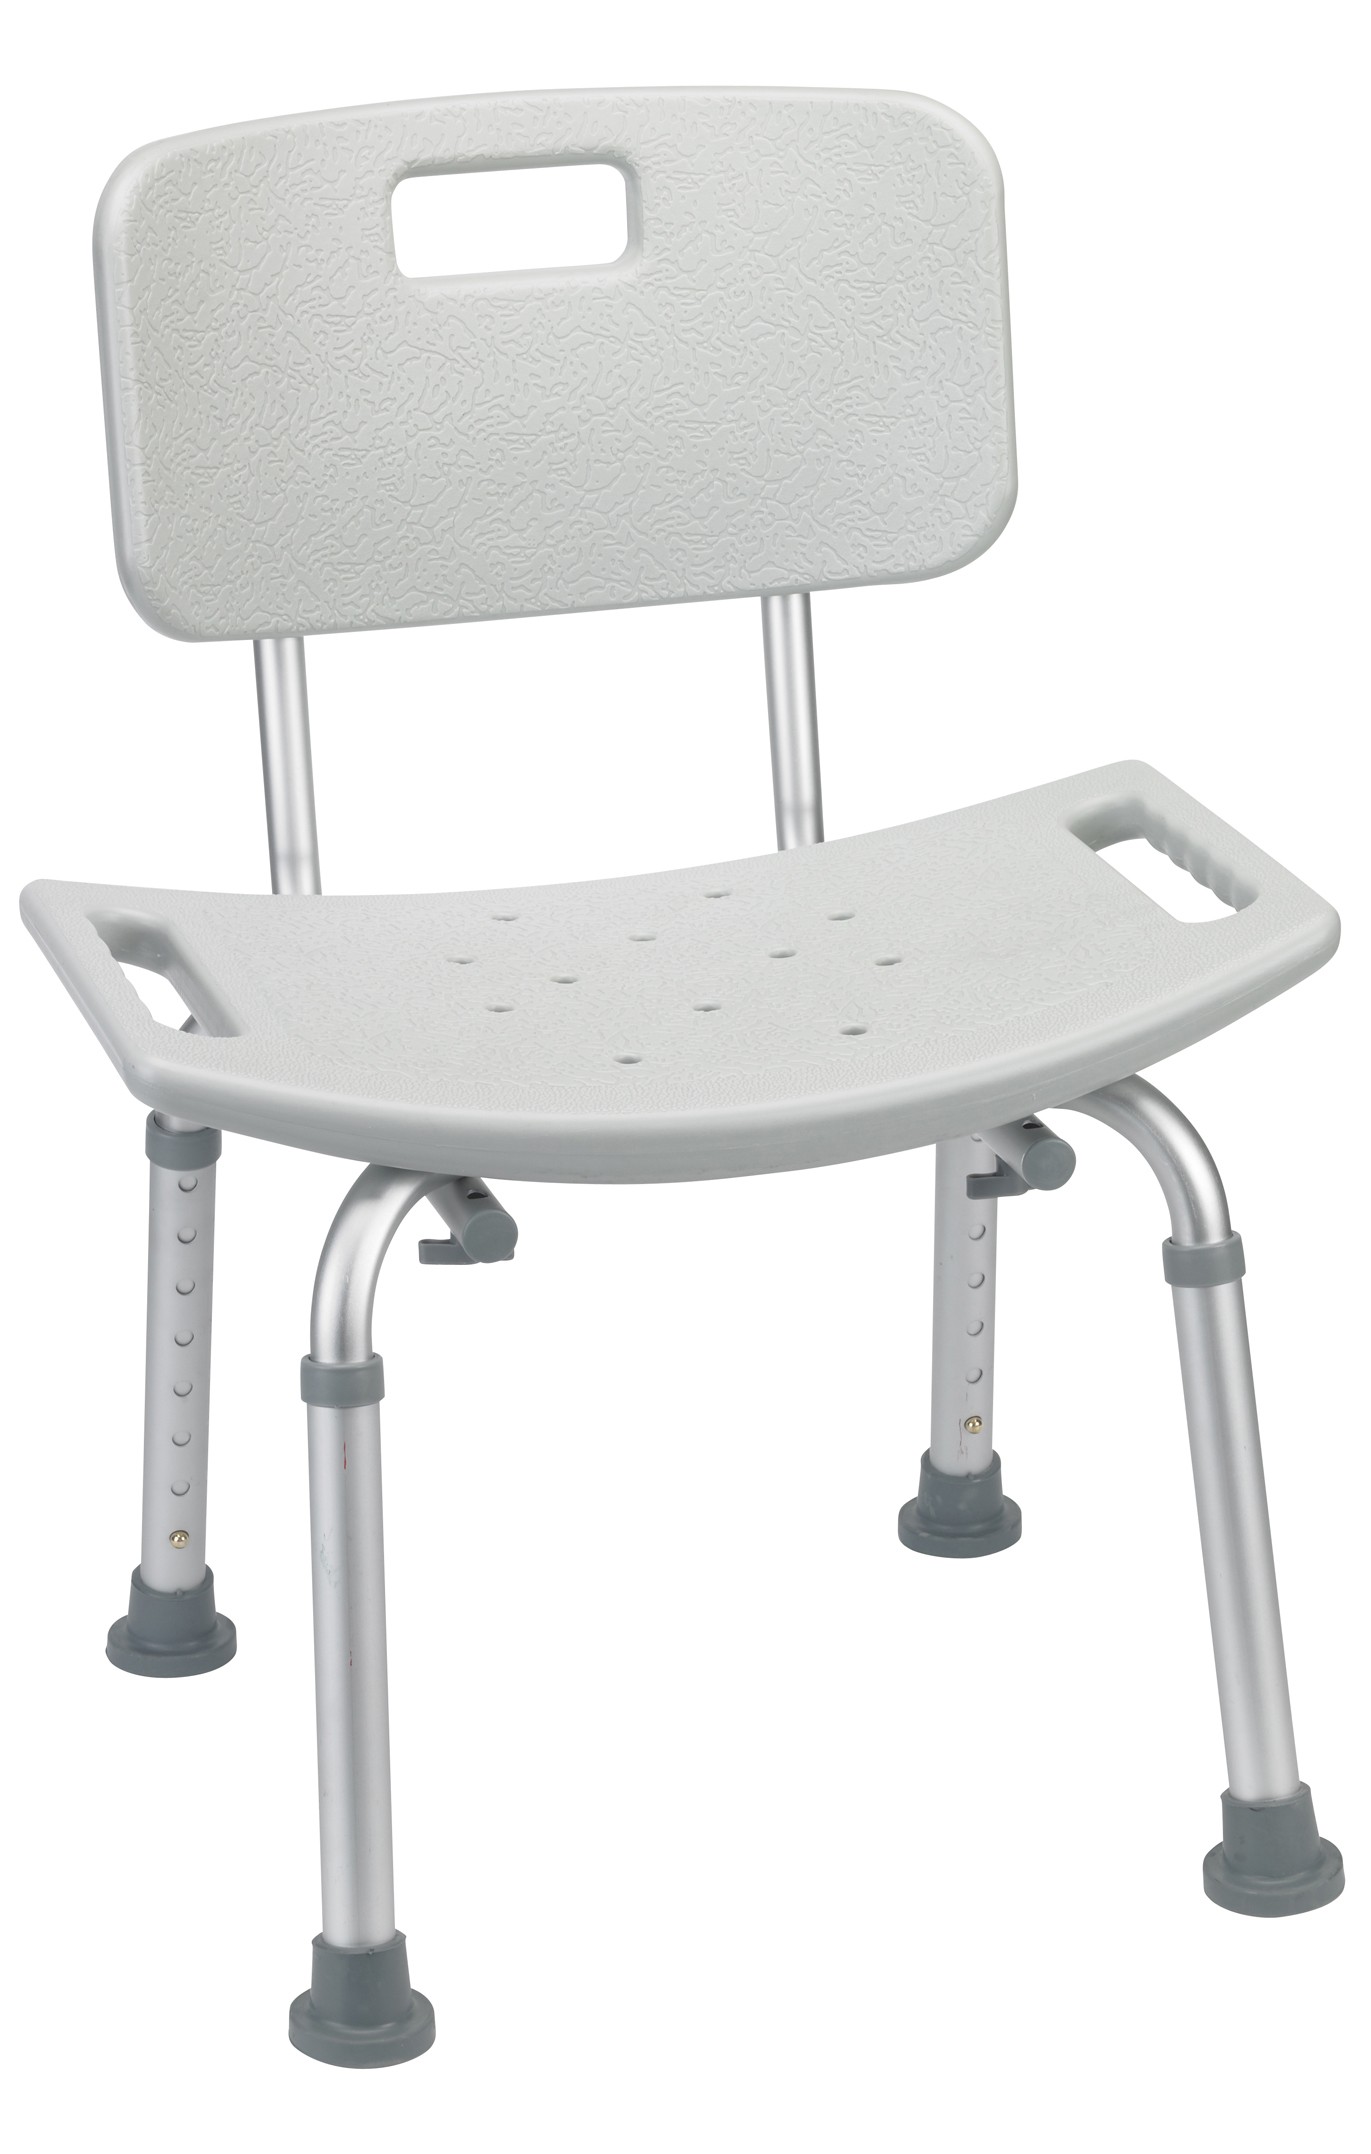 The Drive Deluxe Knock Down Aluminum Bath Seat Is A Non Slip Shower Chair For Individuals Who Have Trouble Standing In The Shower Providing A Safe And Secure Seating Option